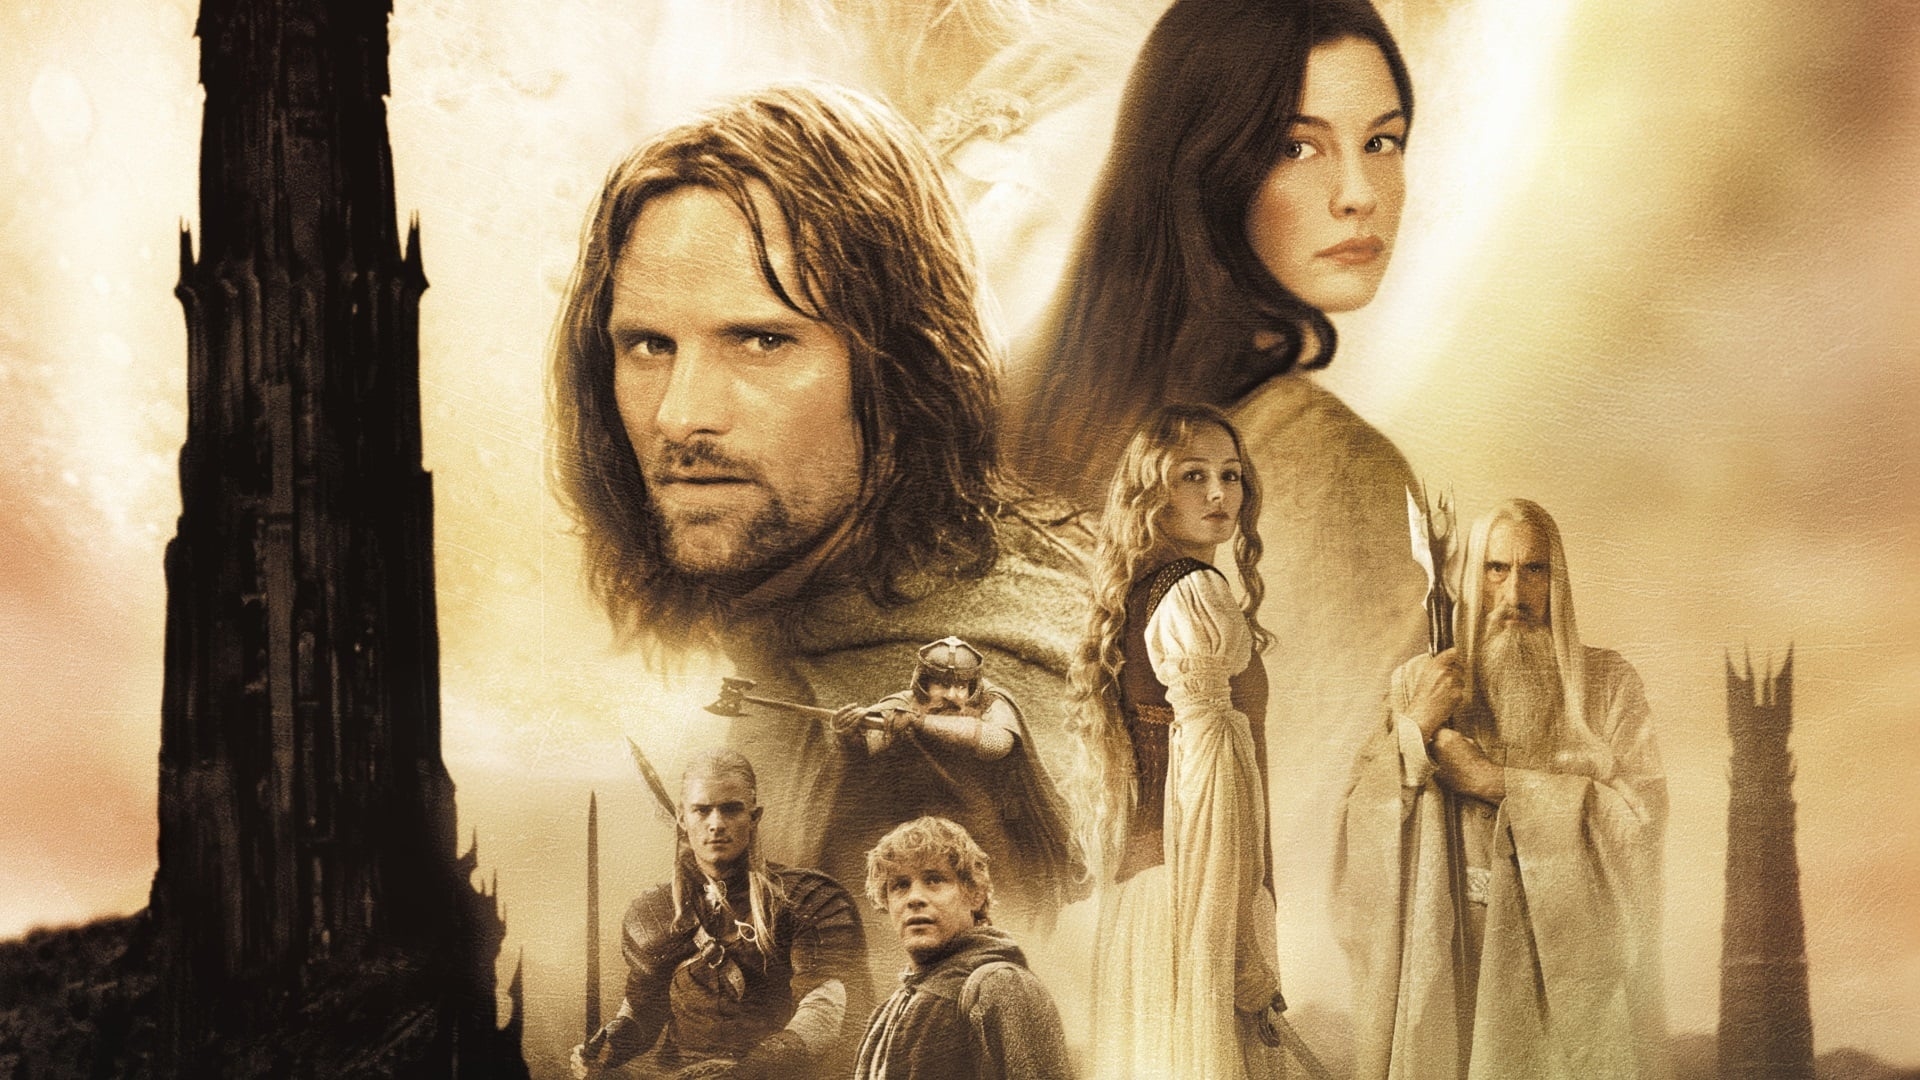 The Lord of the Rings: The Two Towers instal the new version for windows